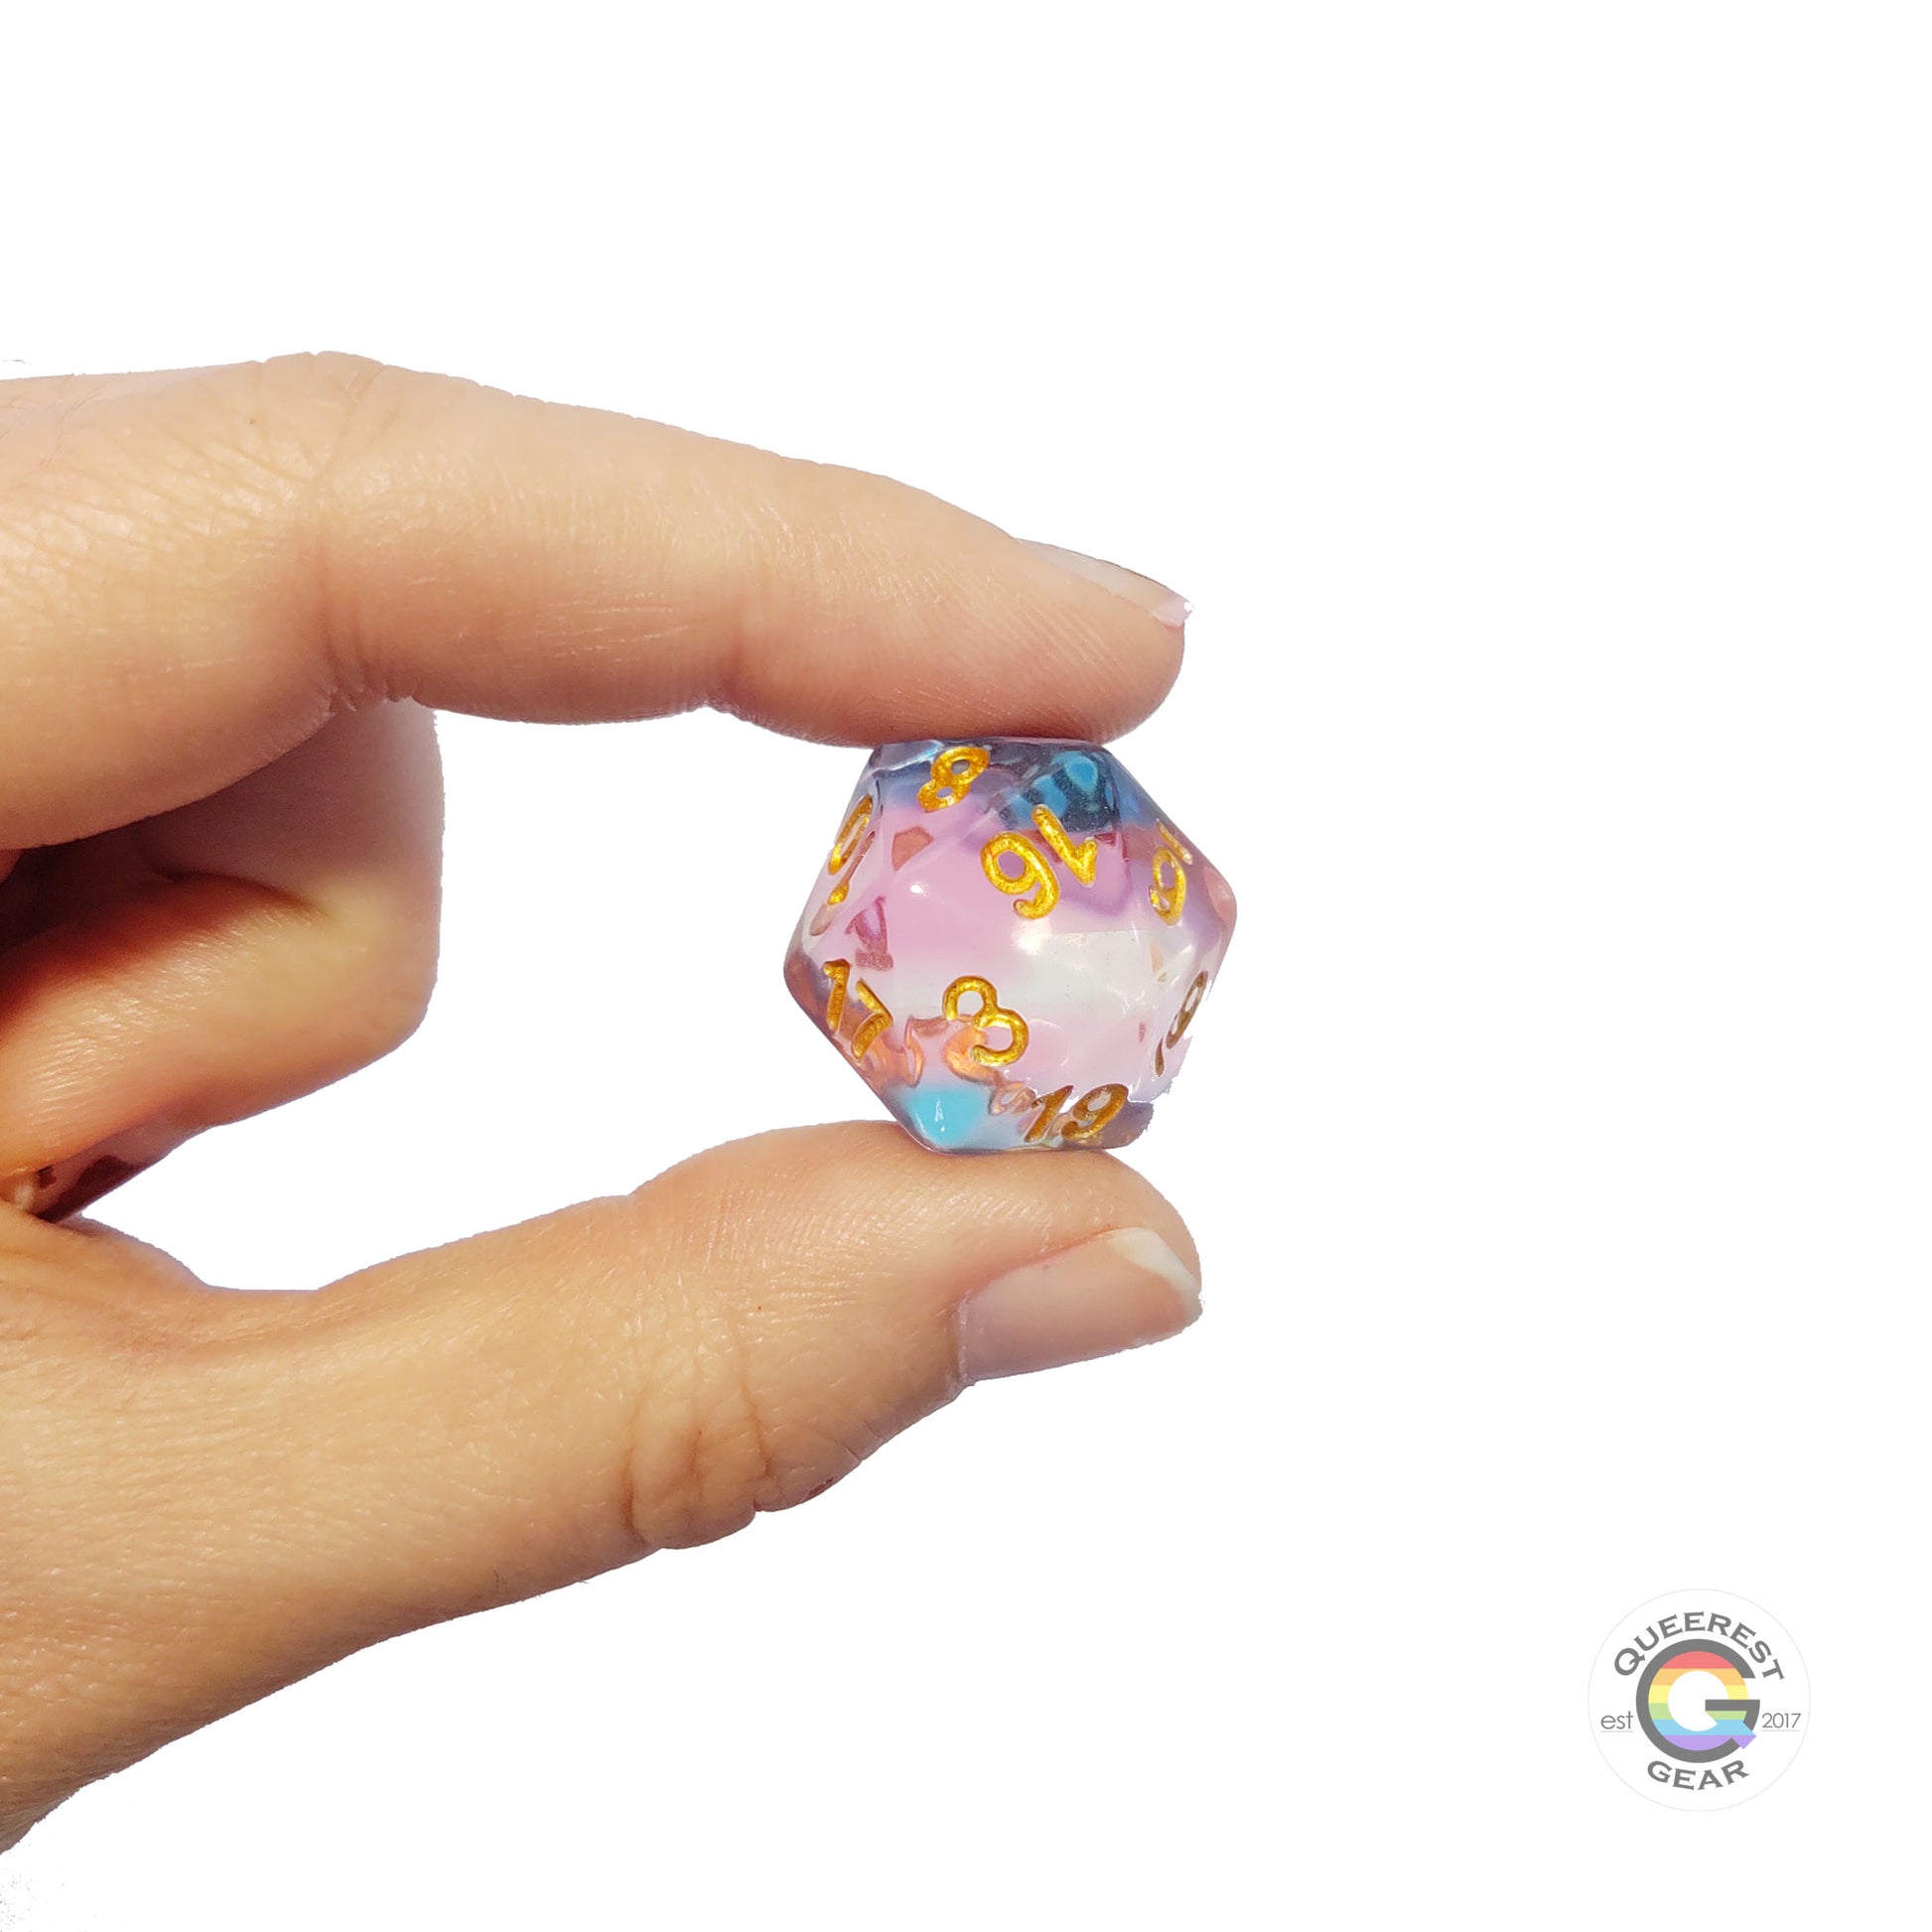 A hand holding up the transgender d20 to show off the color and transparency